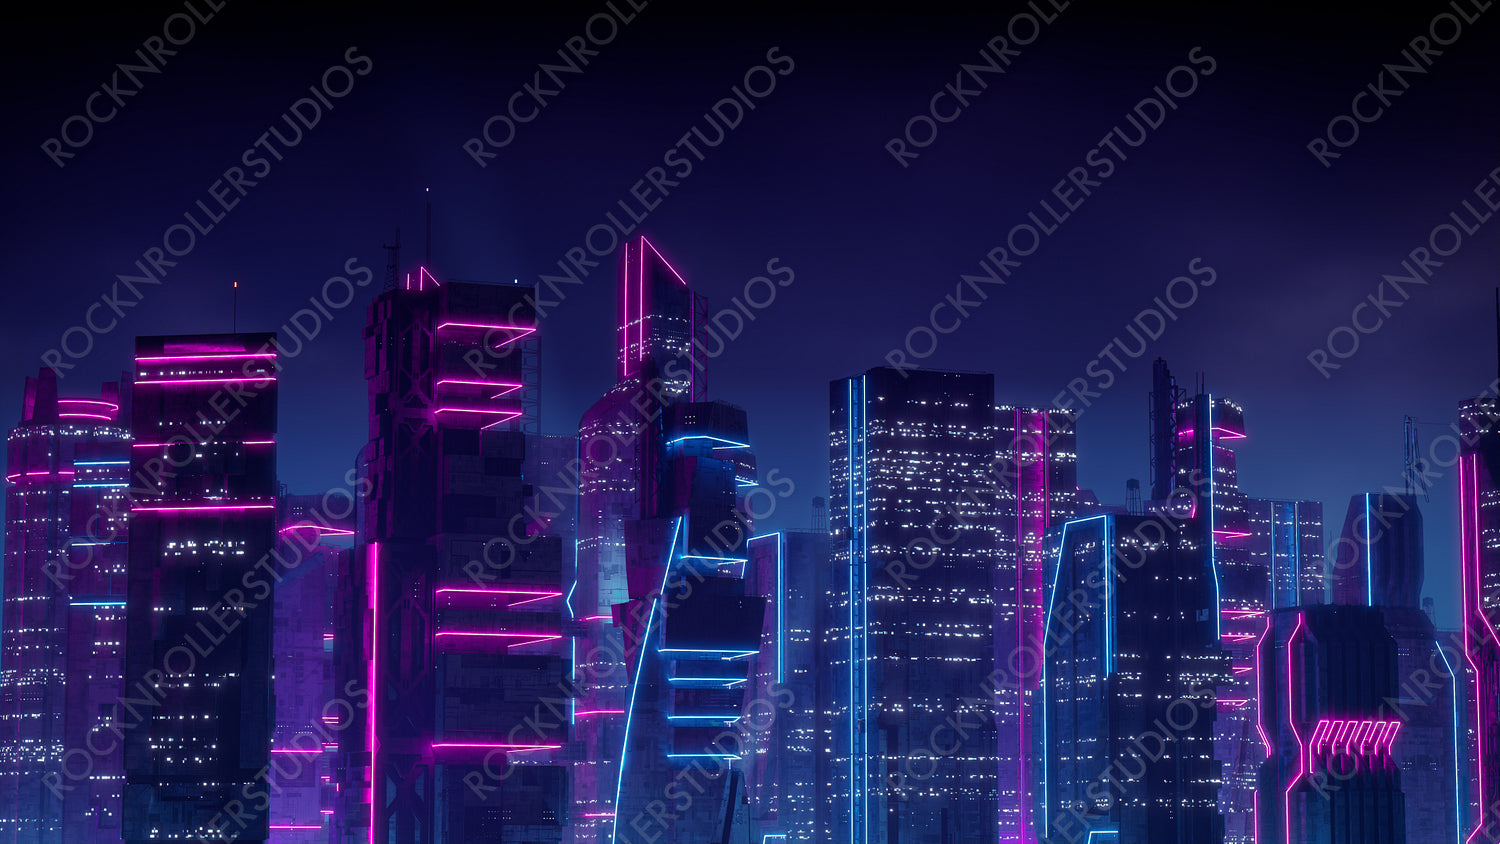 Futuristic City Skyline with Blue and Pink Neon lights. Night scene with Futuristic Skyscrapers.